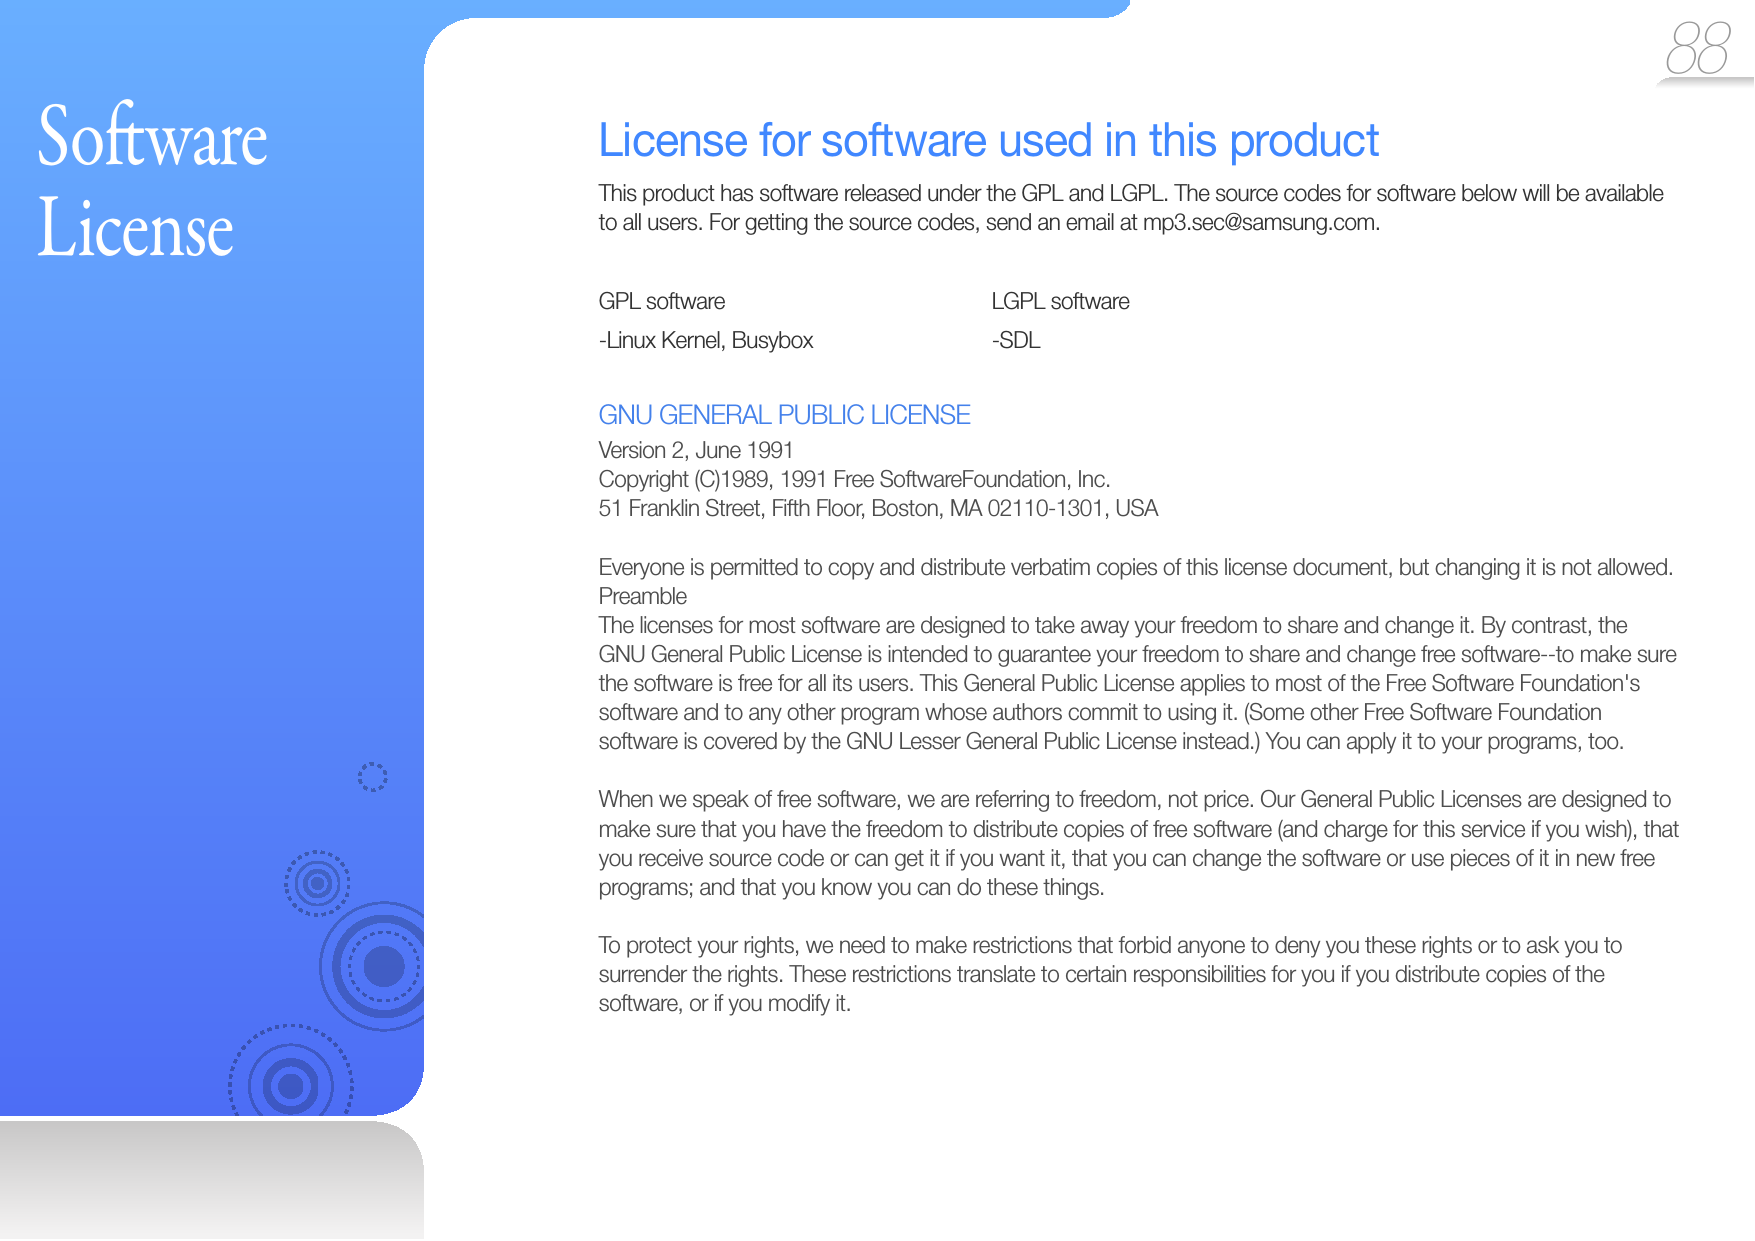 88 So ware LicenseLicense for software used in this productThis product has software released under the GPL and LGPL. The source codes for software below will be available to all users. For getting the source codes, send an email at mp3.sec@samsung.com.GPL software   LGPL software-Linux Kernel, Busybox      -SDLGNU GENERAL PUBLIC LICENSEVersion 2, June 1991Copyright (C)1989, 1991 Free SoftwareFoundation, Inc.51 Franklin Street, Fifth Floor, Boston, MA 02110-1301, USAEveryone is permitted to copy and distribute verbatim copies of this license document, but changing it is not allowed.PreambleThe licenses for most software are designed to take away your freedom to share and change it. By contrast, the GNU General Public License is intended to guarantee your freedom to share and change free software--to make sure the software is free for all its users. This General Public License applies to most of the Free Software Foundation&apos;s software and to any other program whose authors commit to using it. (Some other Free Software Foundation software is covered by the GNU Lesser General Public License instead.) You can apply it to your programs, too.When we speak of free software, we are referring to freedom, not price. Our General Public Licenses are designed to make sure that you have the freedom to distribute copies of free software (and charge for this service if you wish), that you receive source code or can get it if you want it, that you can change the software or use pieces of it in new free programs; and that you know you can do these things.To protect your rights, we need to make restrictions that forbid anyone to deny you these rights or to ask you to surrender the rights. These restrictions translate to certain responsibilities for you if you distribute copies of the software, or if you modify it.